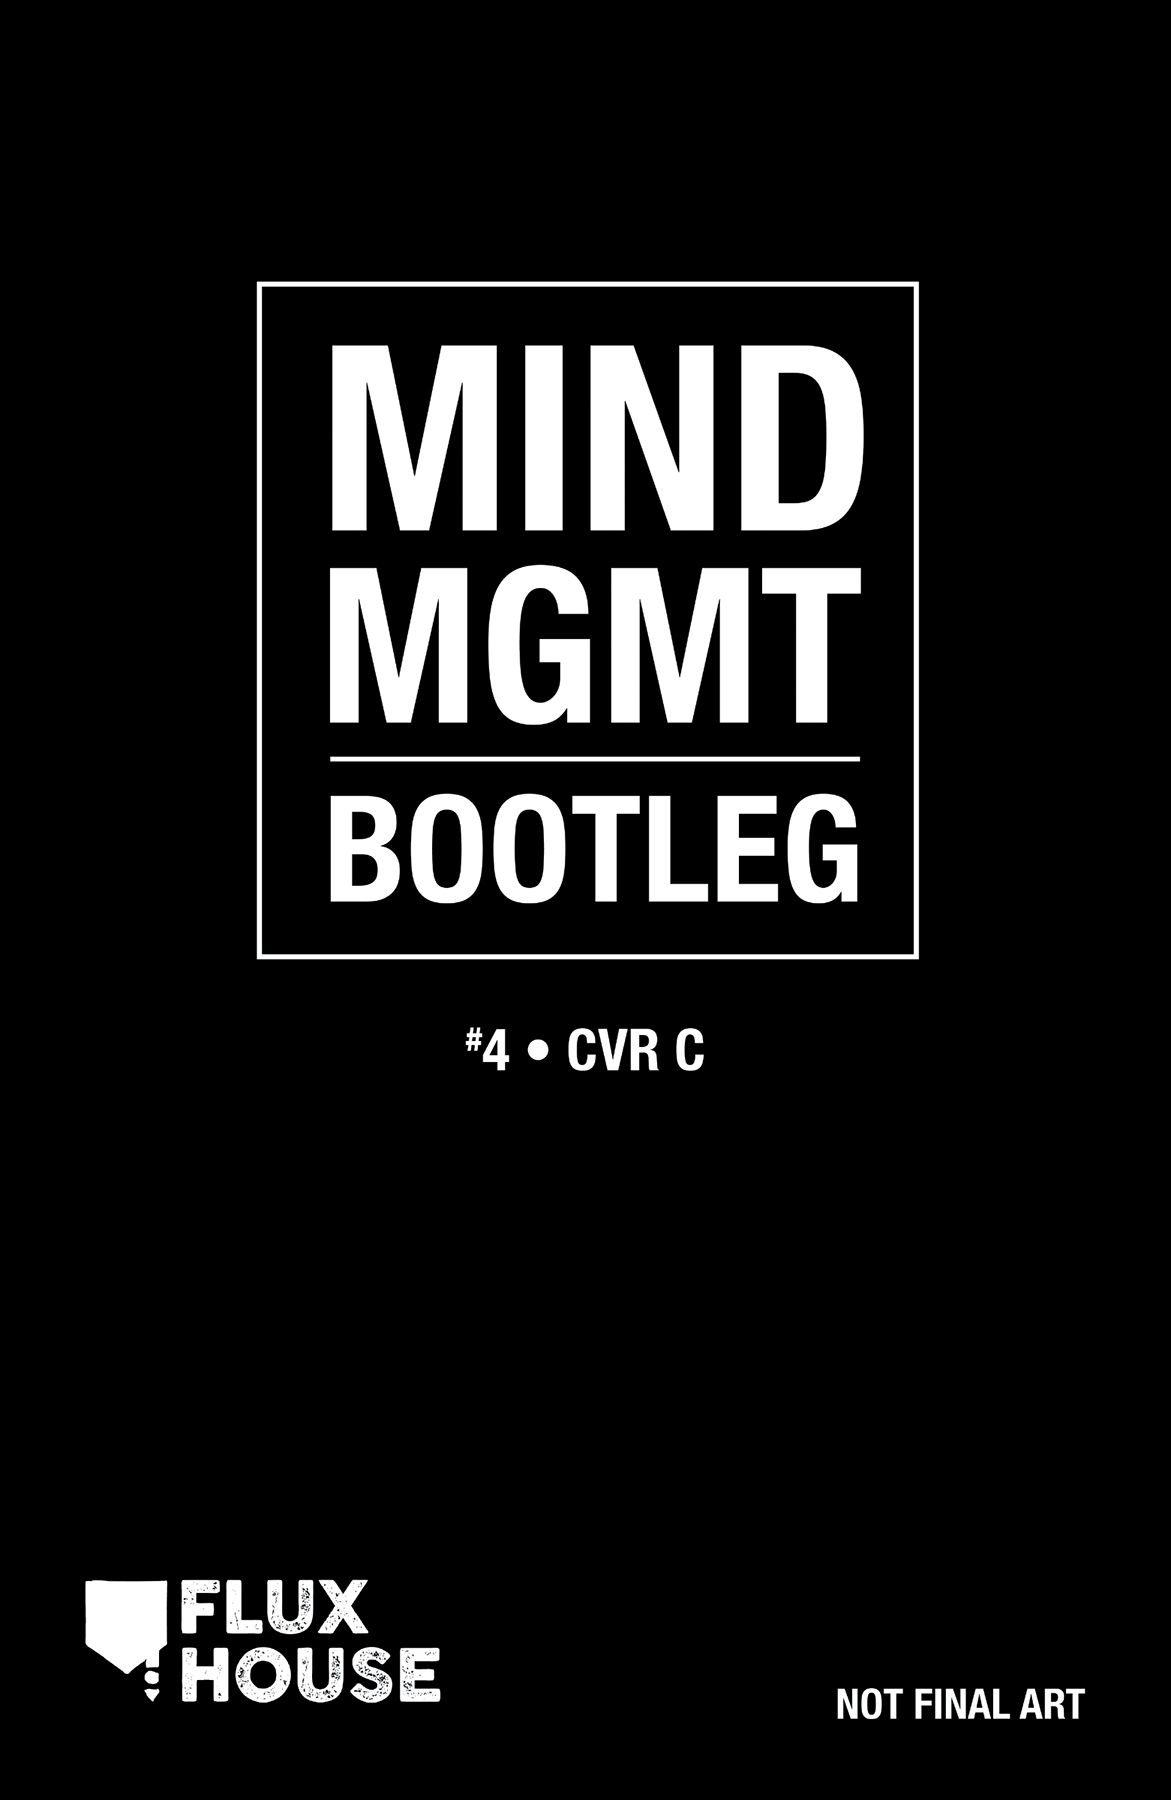 Mind Mgmt Bootleg #4 Cover C Wiesenfeld (Of 4)